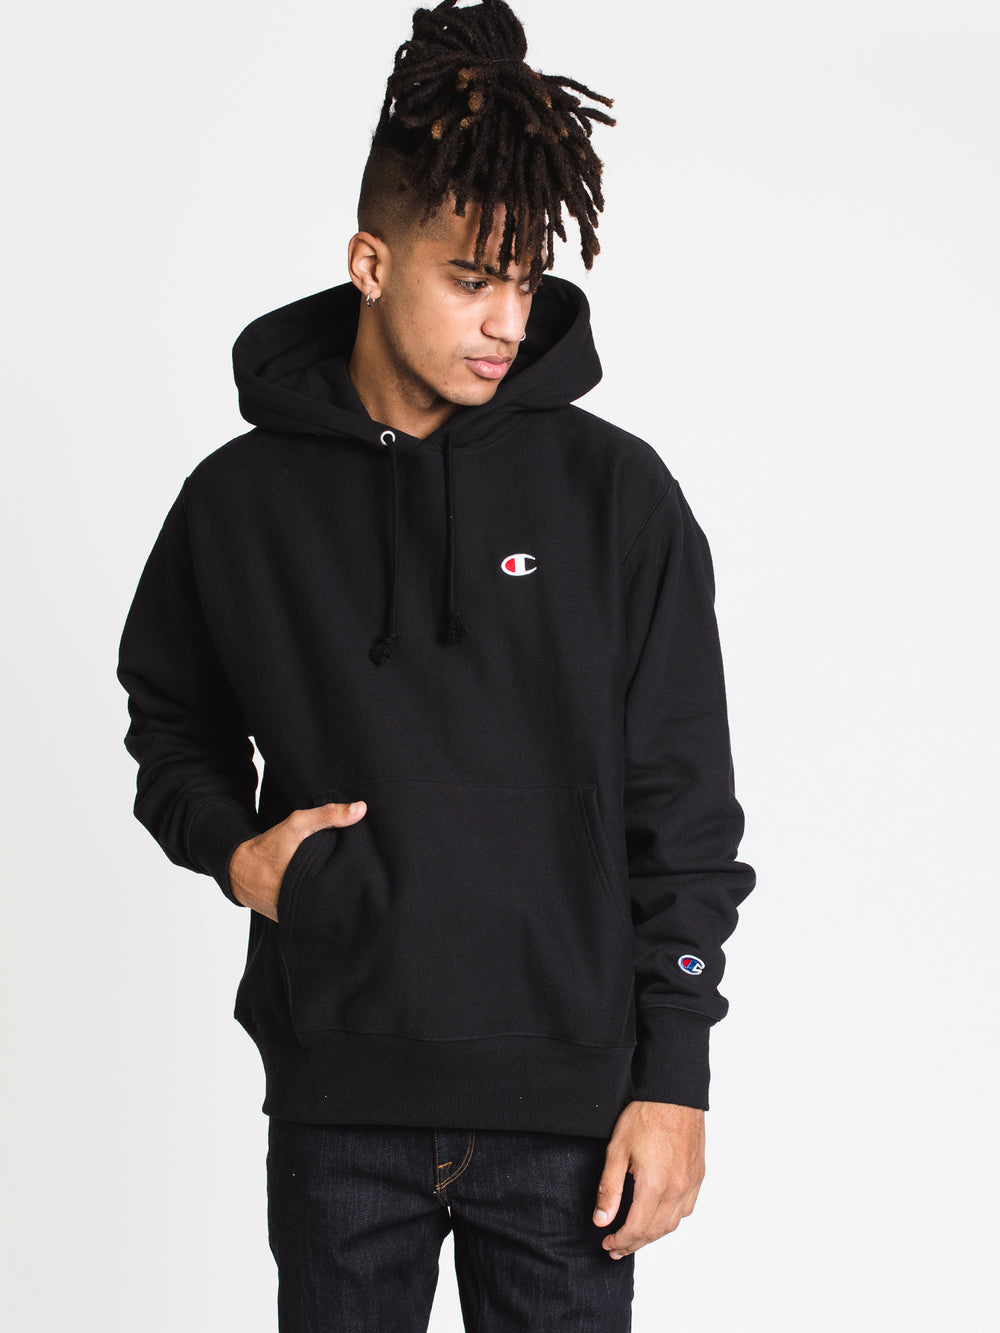 CHAMPION REV WEAVE PULL OVER HOODIE - BLACK - CLEARANCE